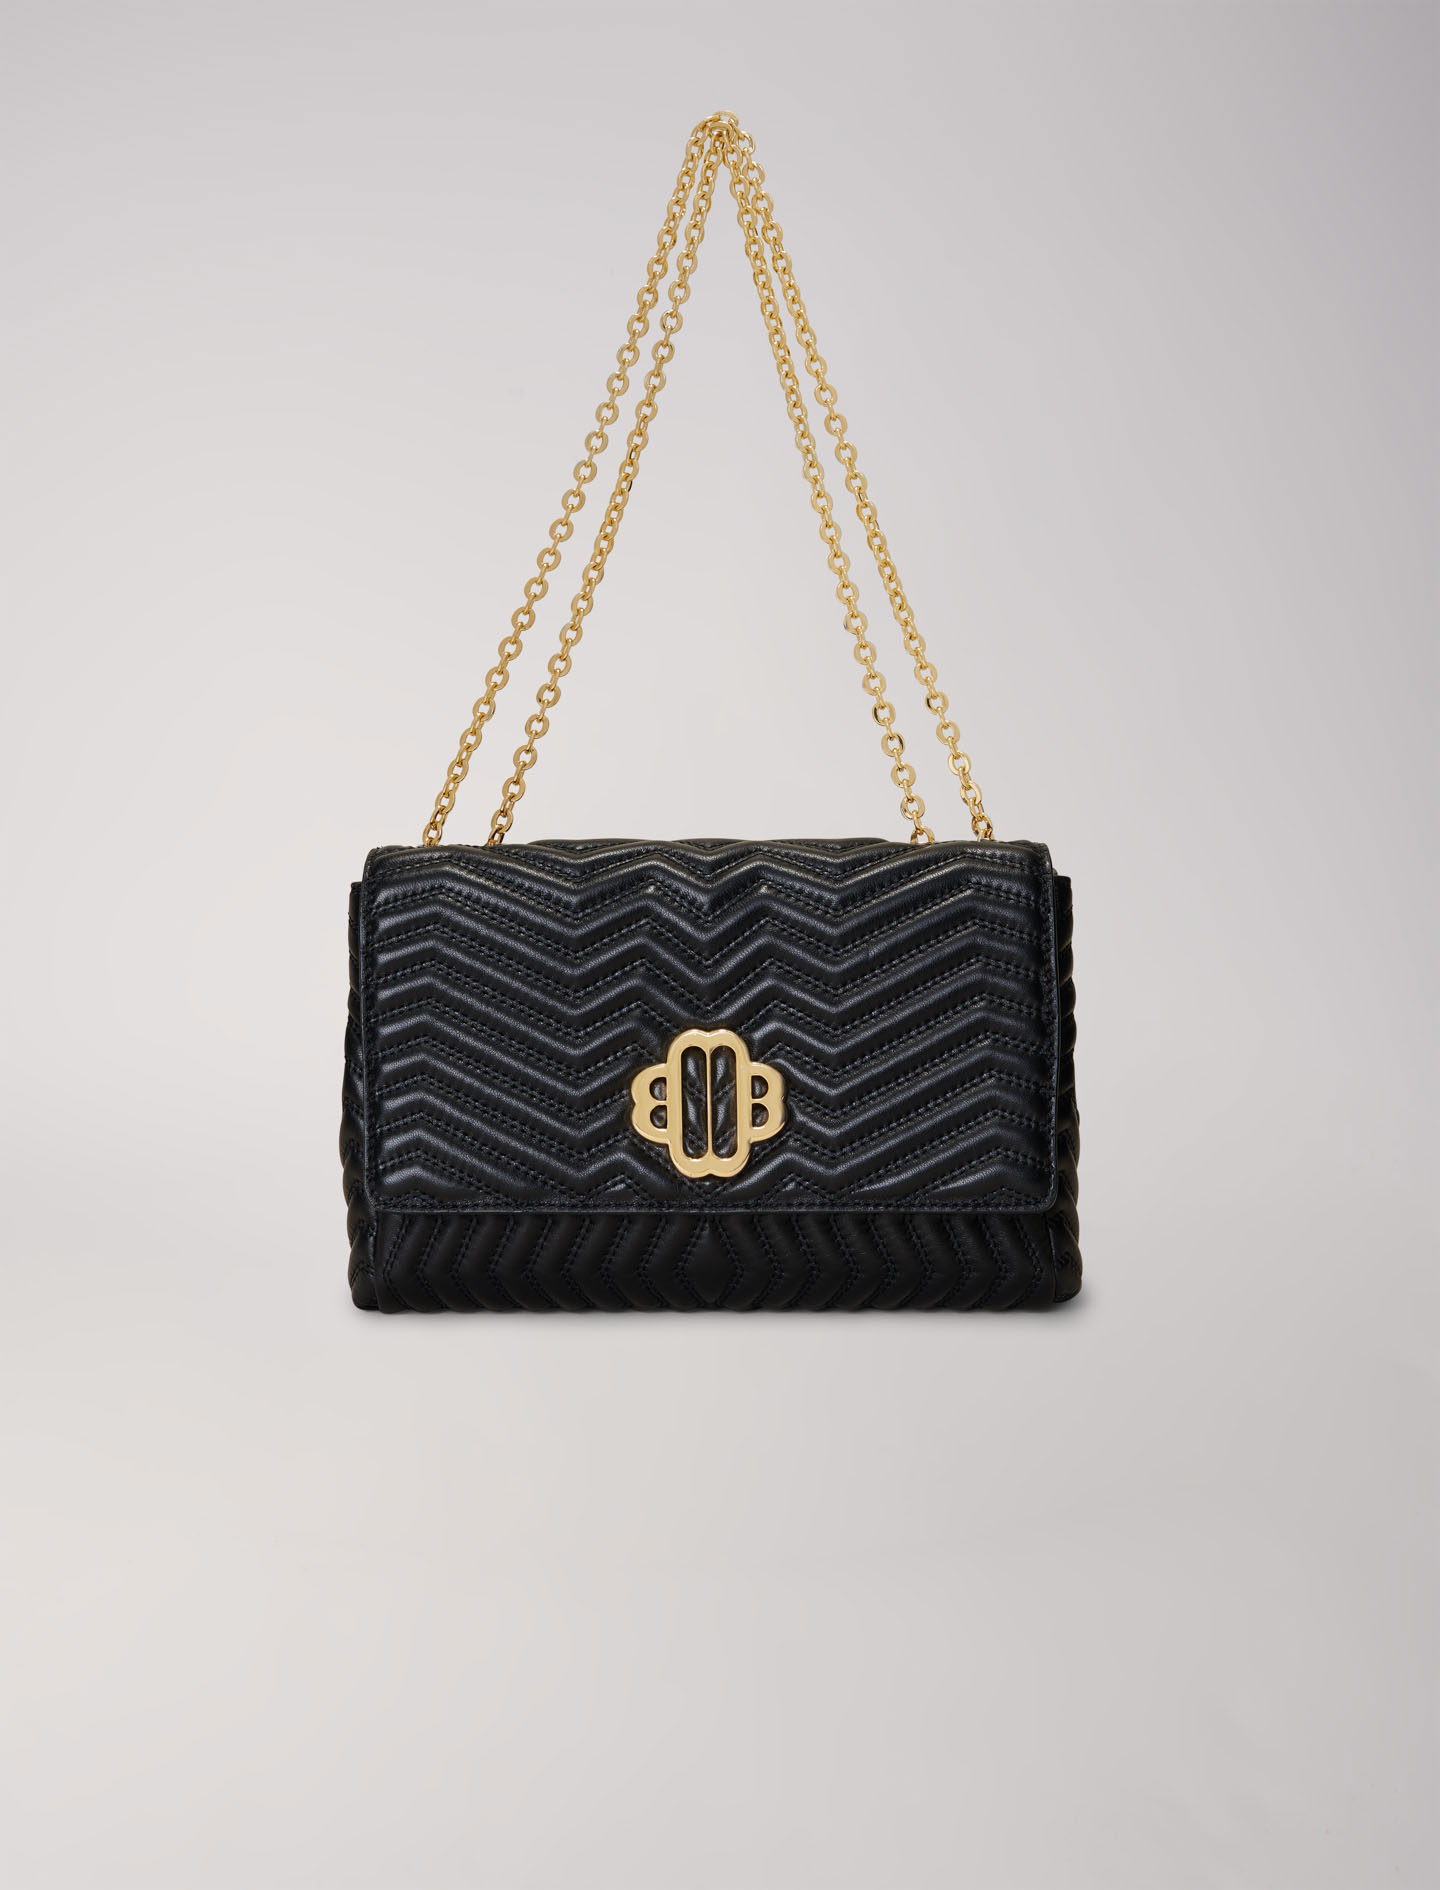 Maje Woman's cotton Coating: Leather bag with chain strap for Spring/Summer, in color Black / Black